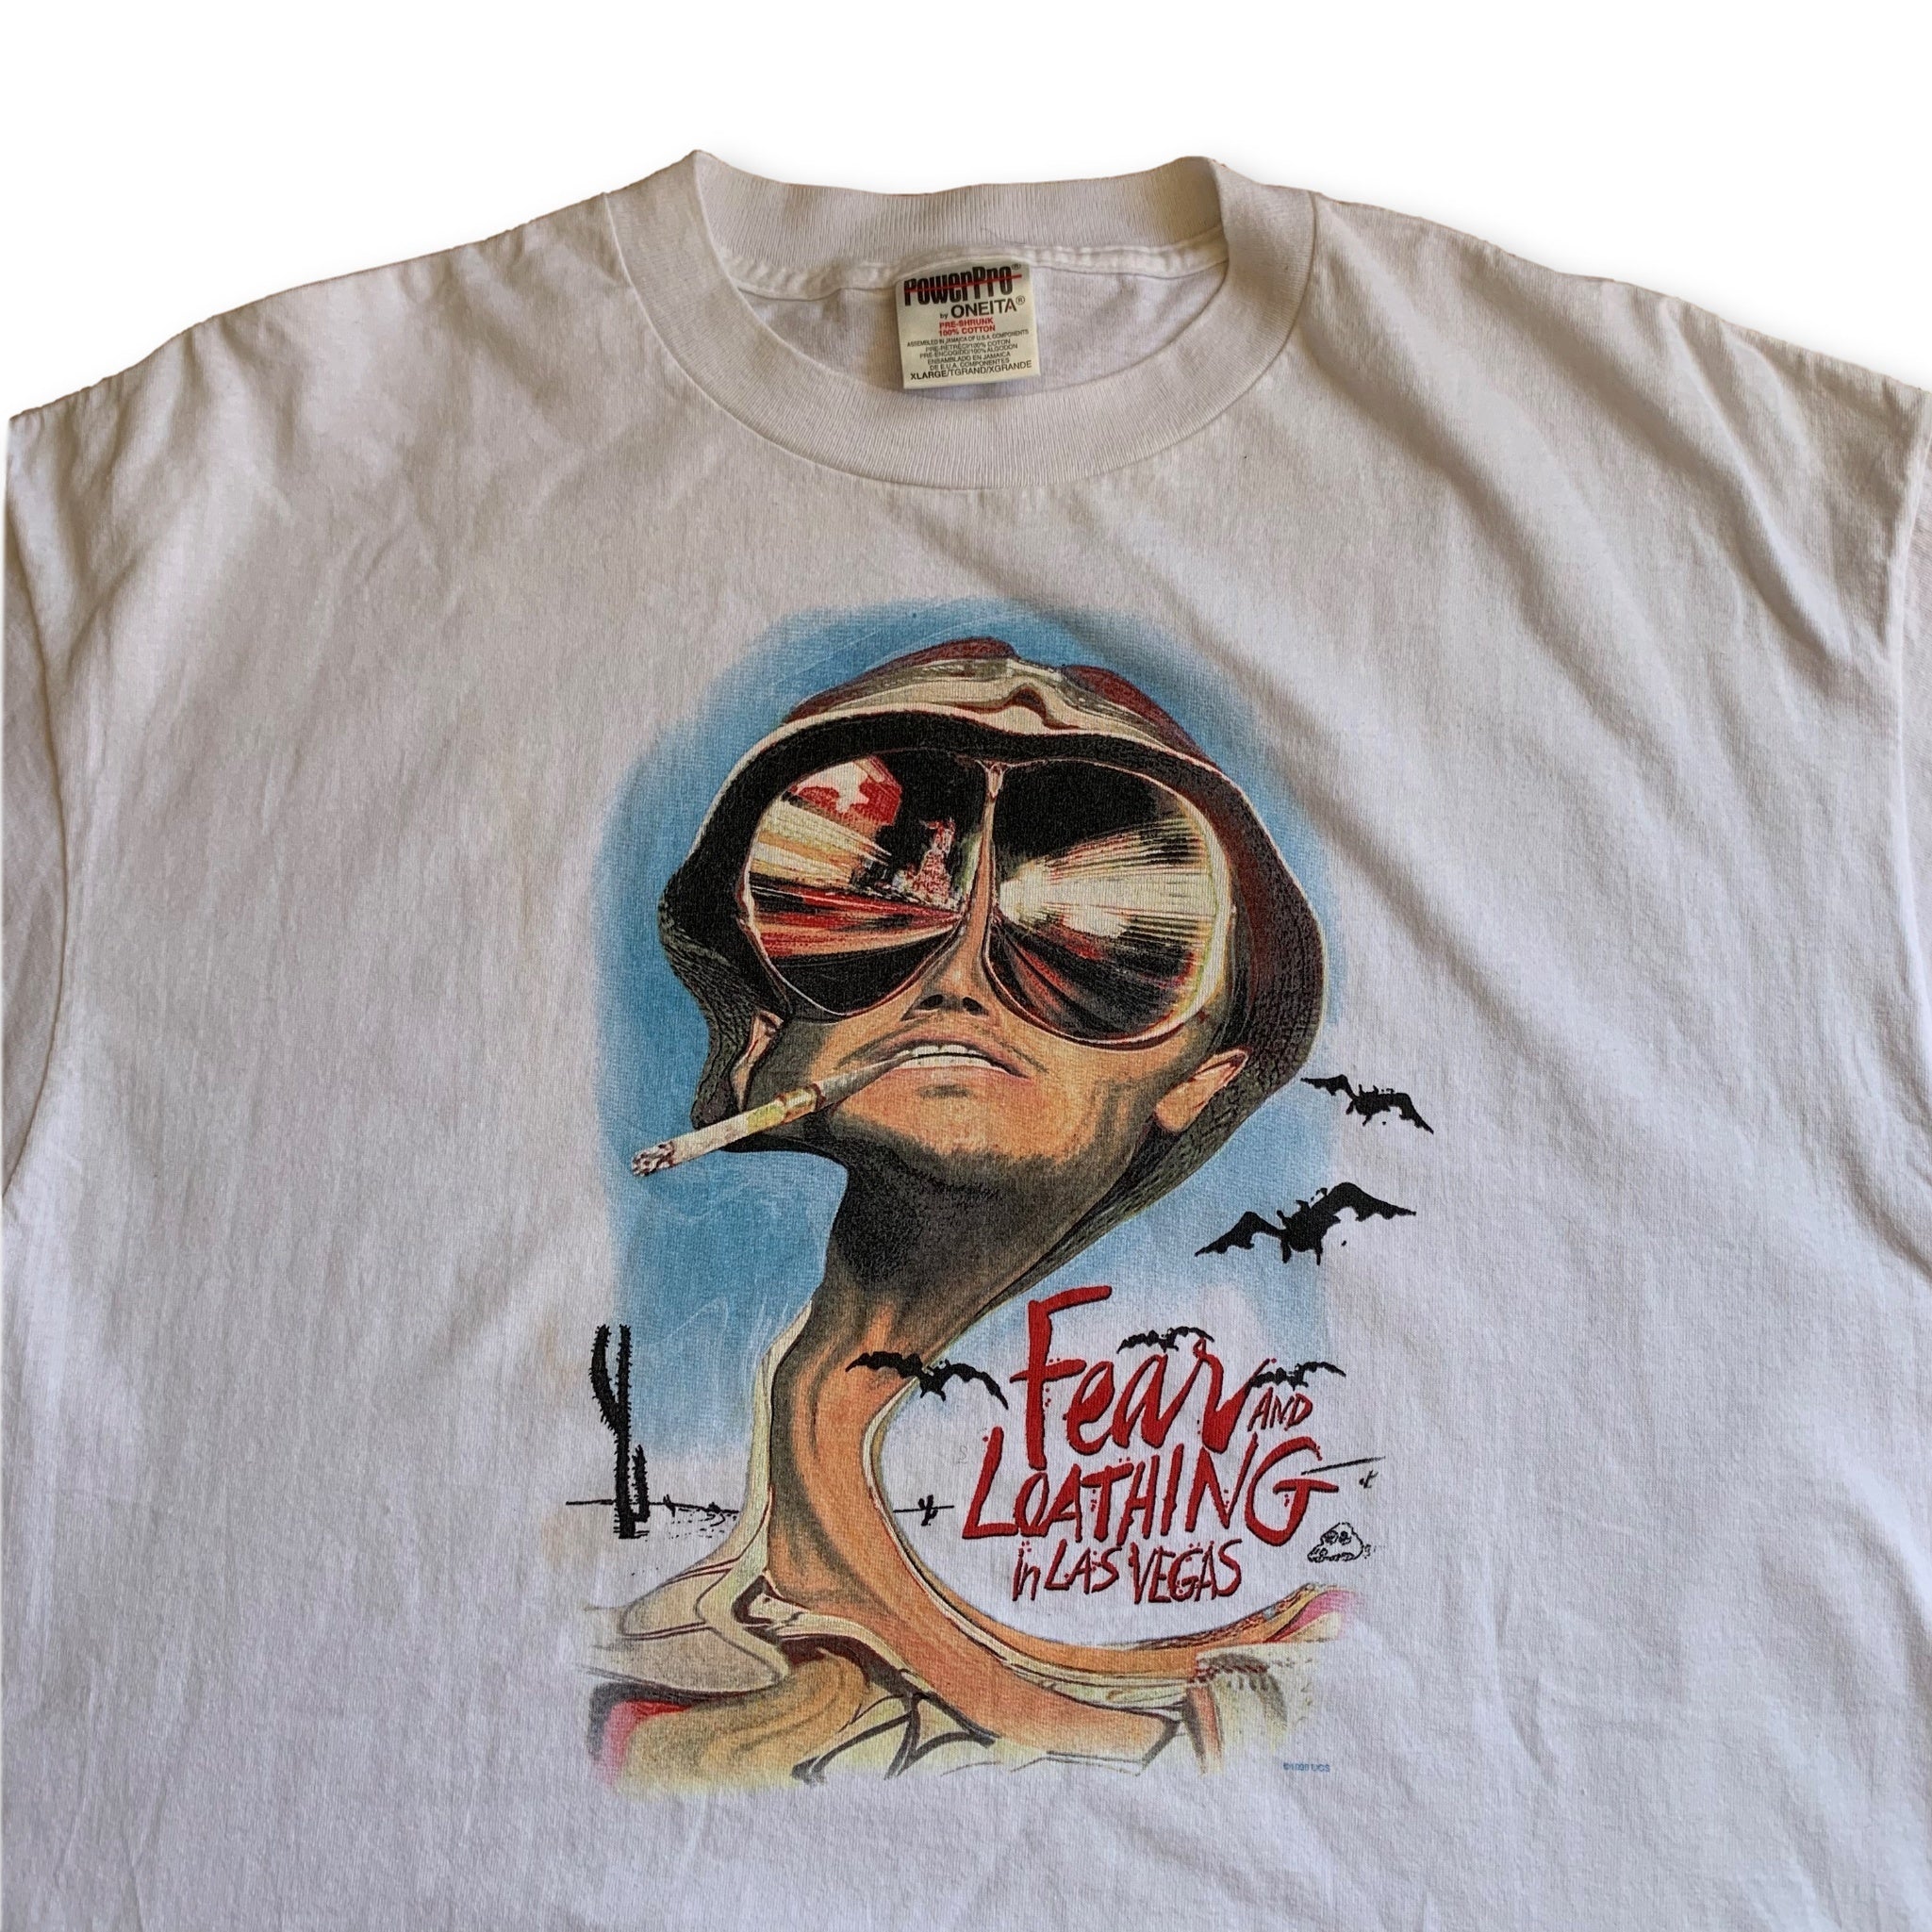 Vintage Fear and Loathing Movie T-Shirt - XL